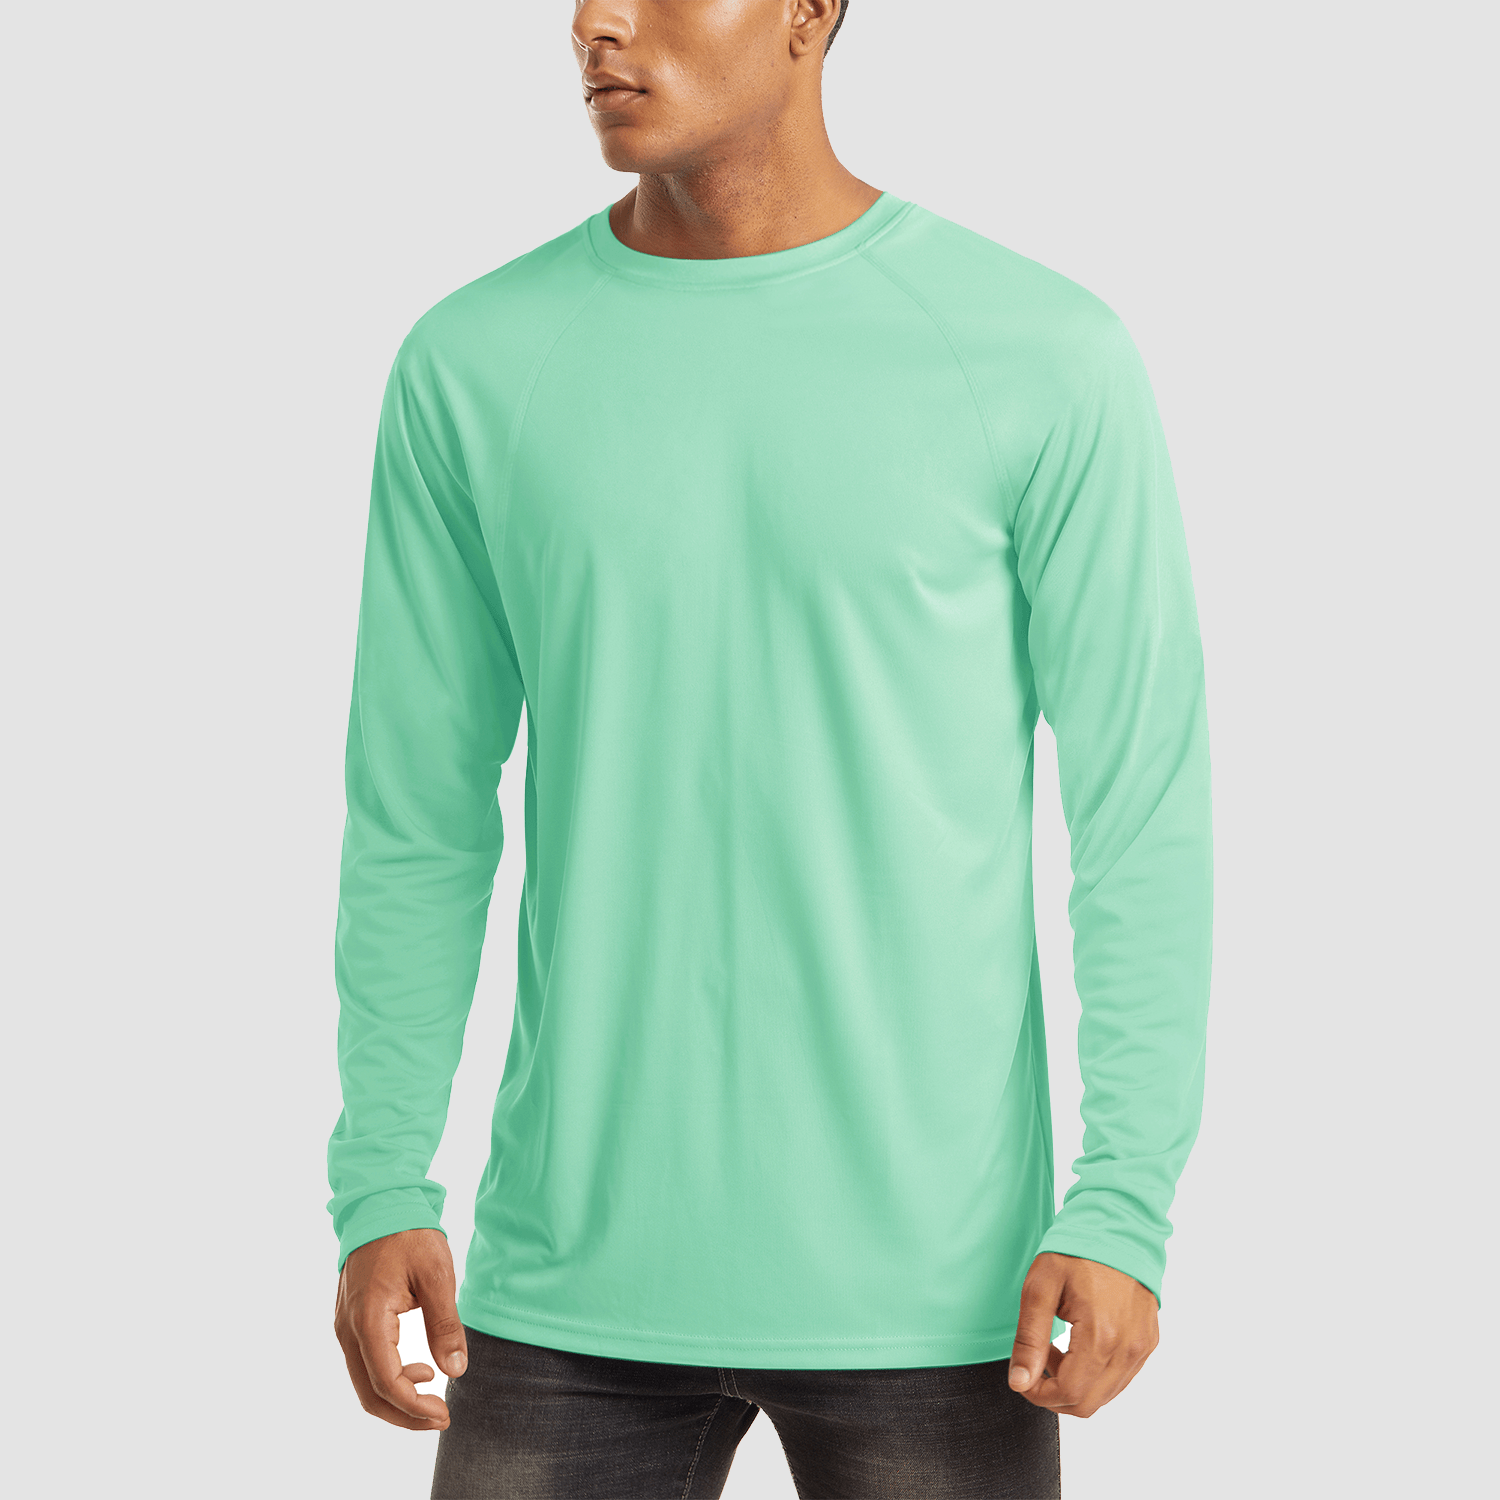 Buy 4 Get the 4th Free】Men's Long Sleeve UPF 50+ UV Sun Protection At –  MAGCOMSEN